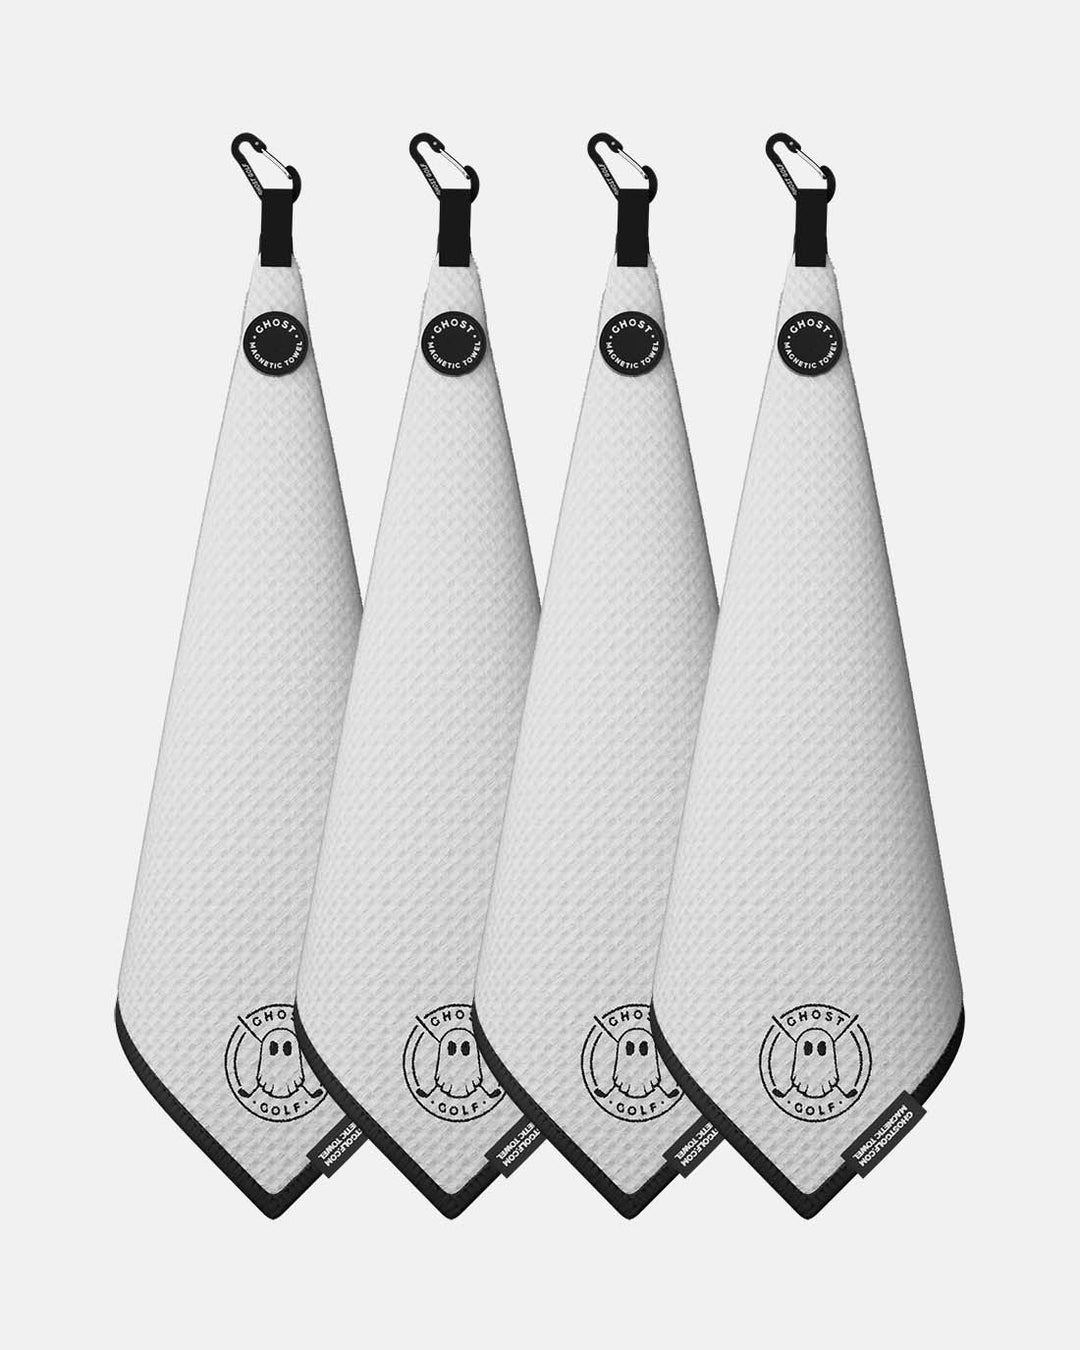 4 Ghost Golf Greenside towels with Magnet Patch and Carabiner. Color White